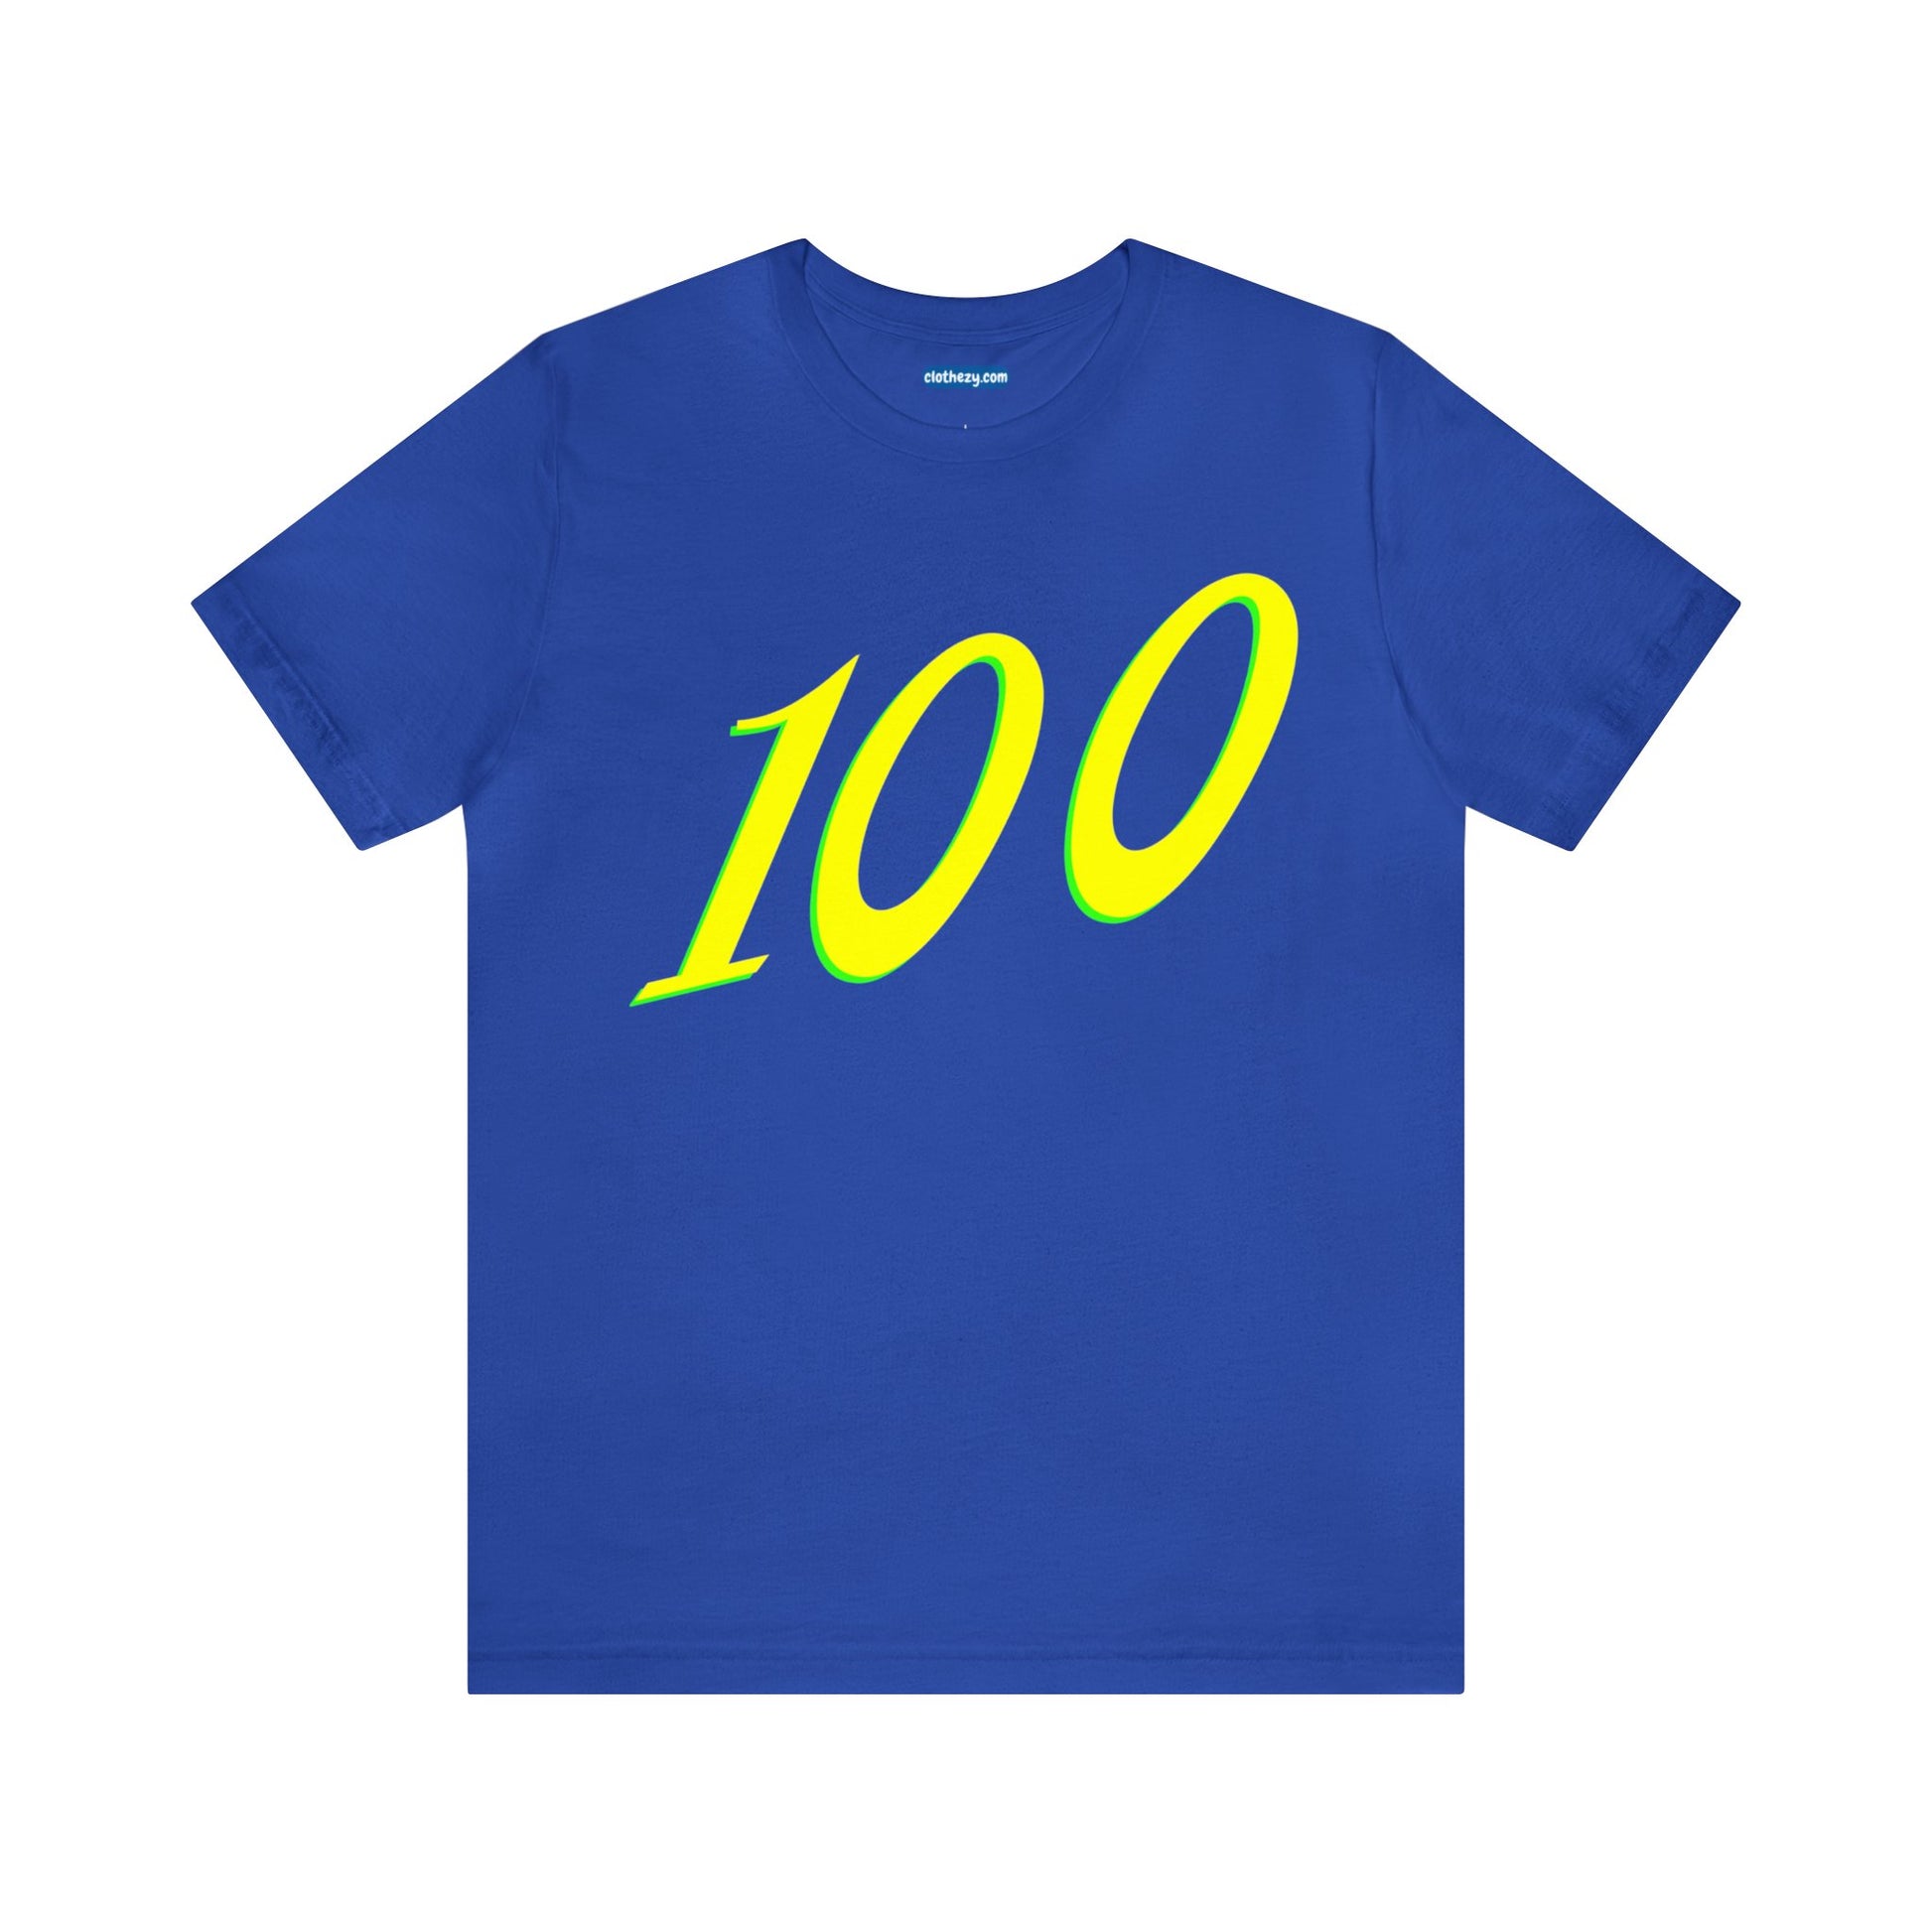 Number 100 Design - Soft Cotton Tee for birthdays and celebrations, Gift for friends and family, Multiple Options by clothezy.com in Royal Blue Size Small - Buy Now